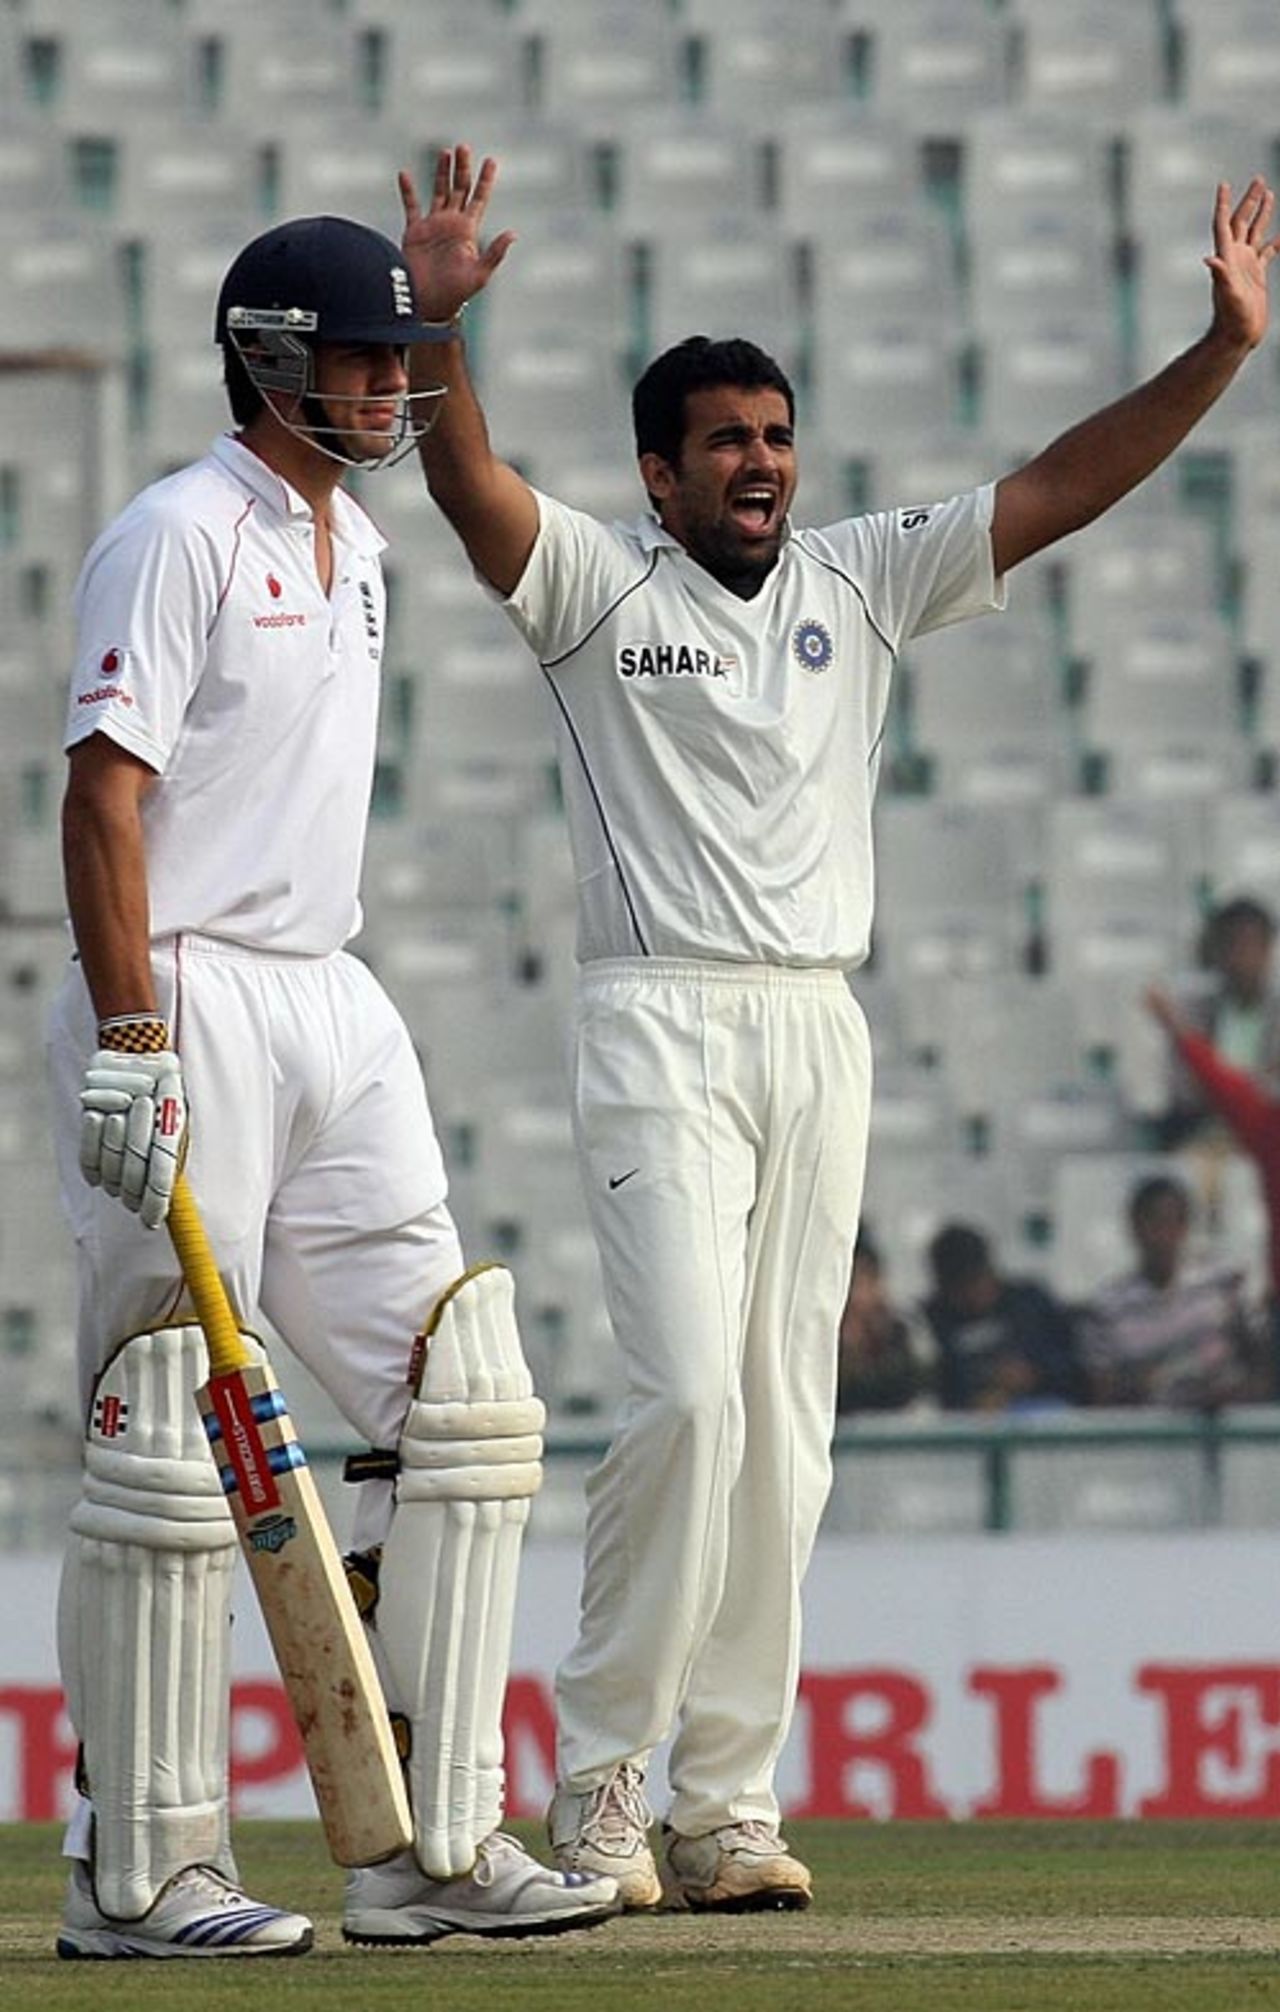 Zaheer Khan appeals unsuccessfully for an lbw against Alastair Cook , India v England, 2nd Test, Mohali, 3rd day, December 21, 2008